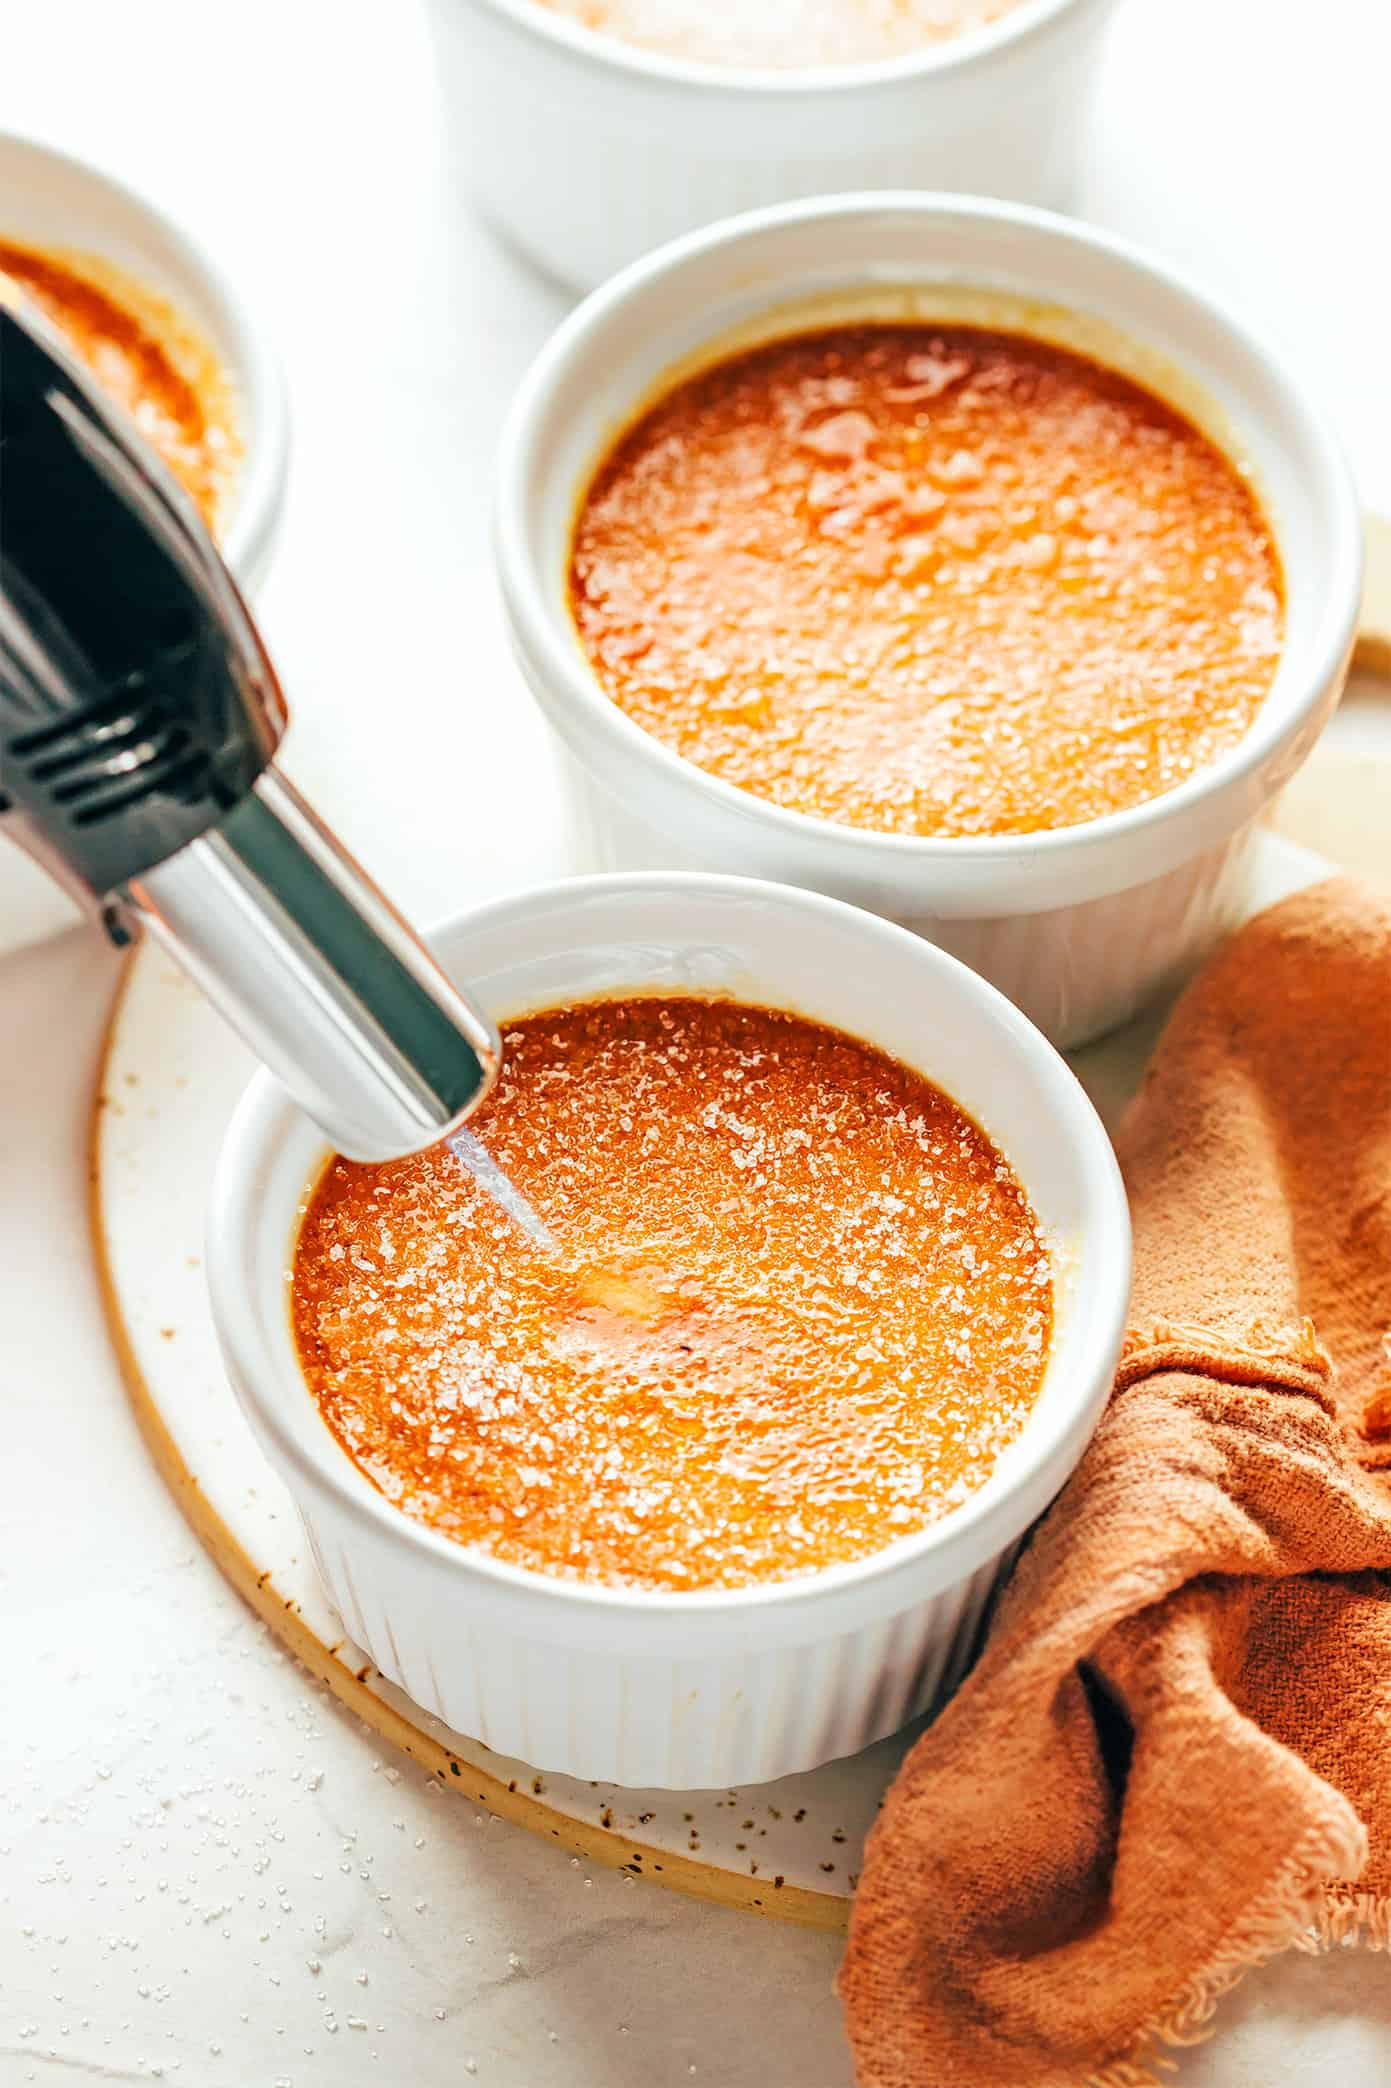 Using a kitchen torch to caramelize the sugar for Crème Brûlée